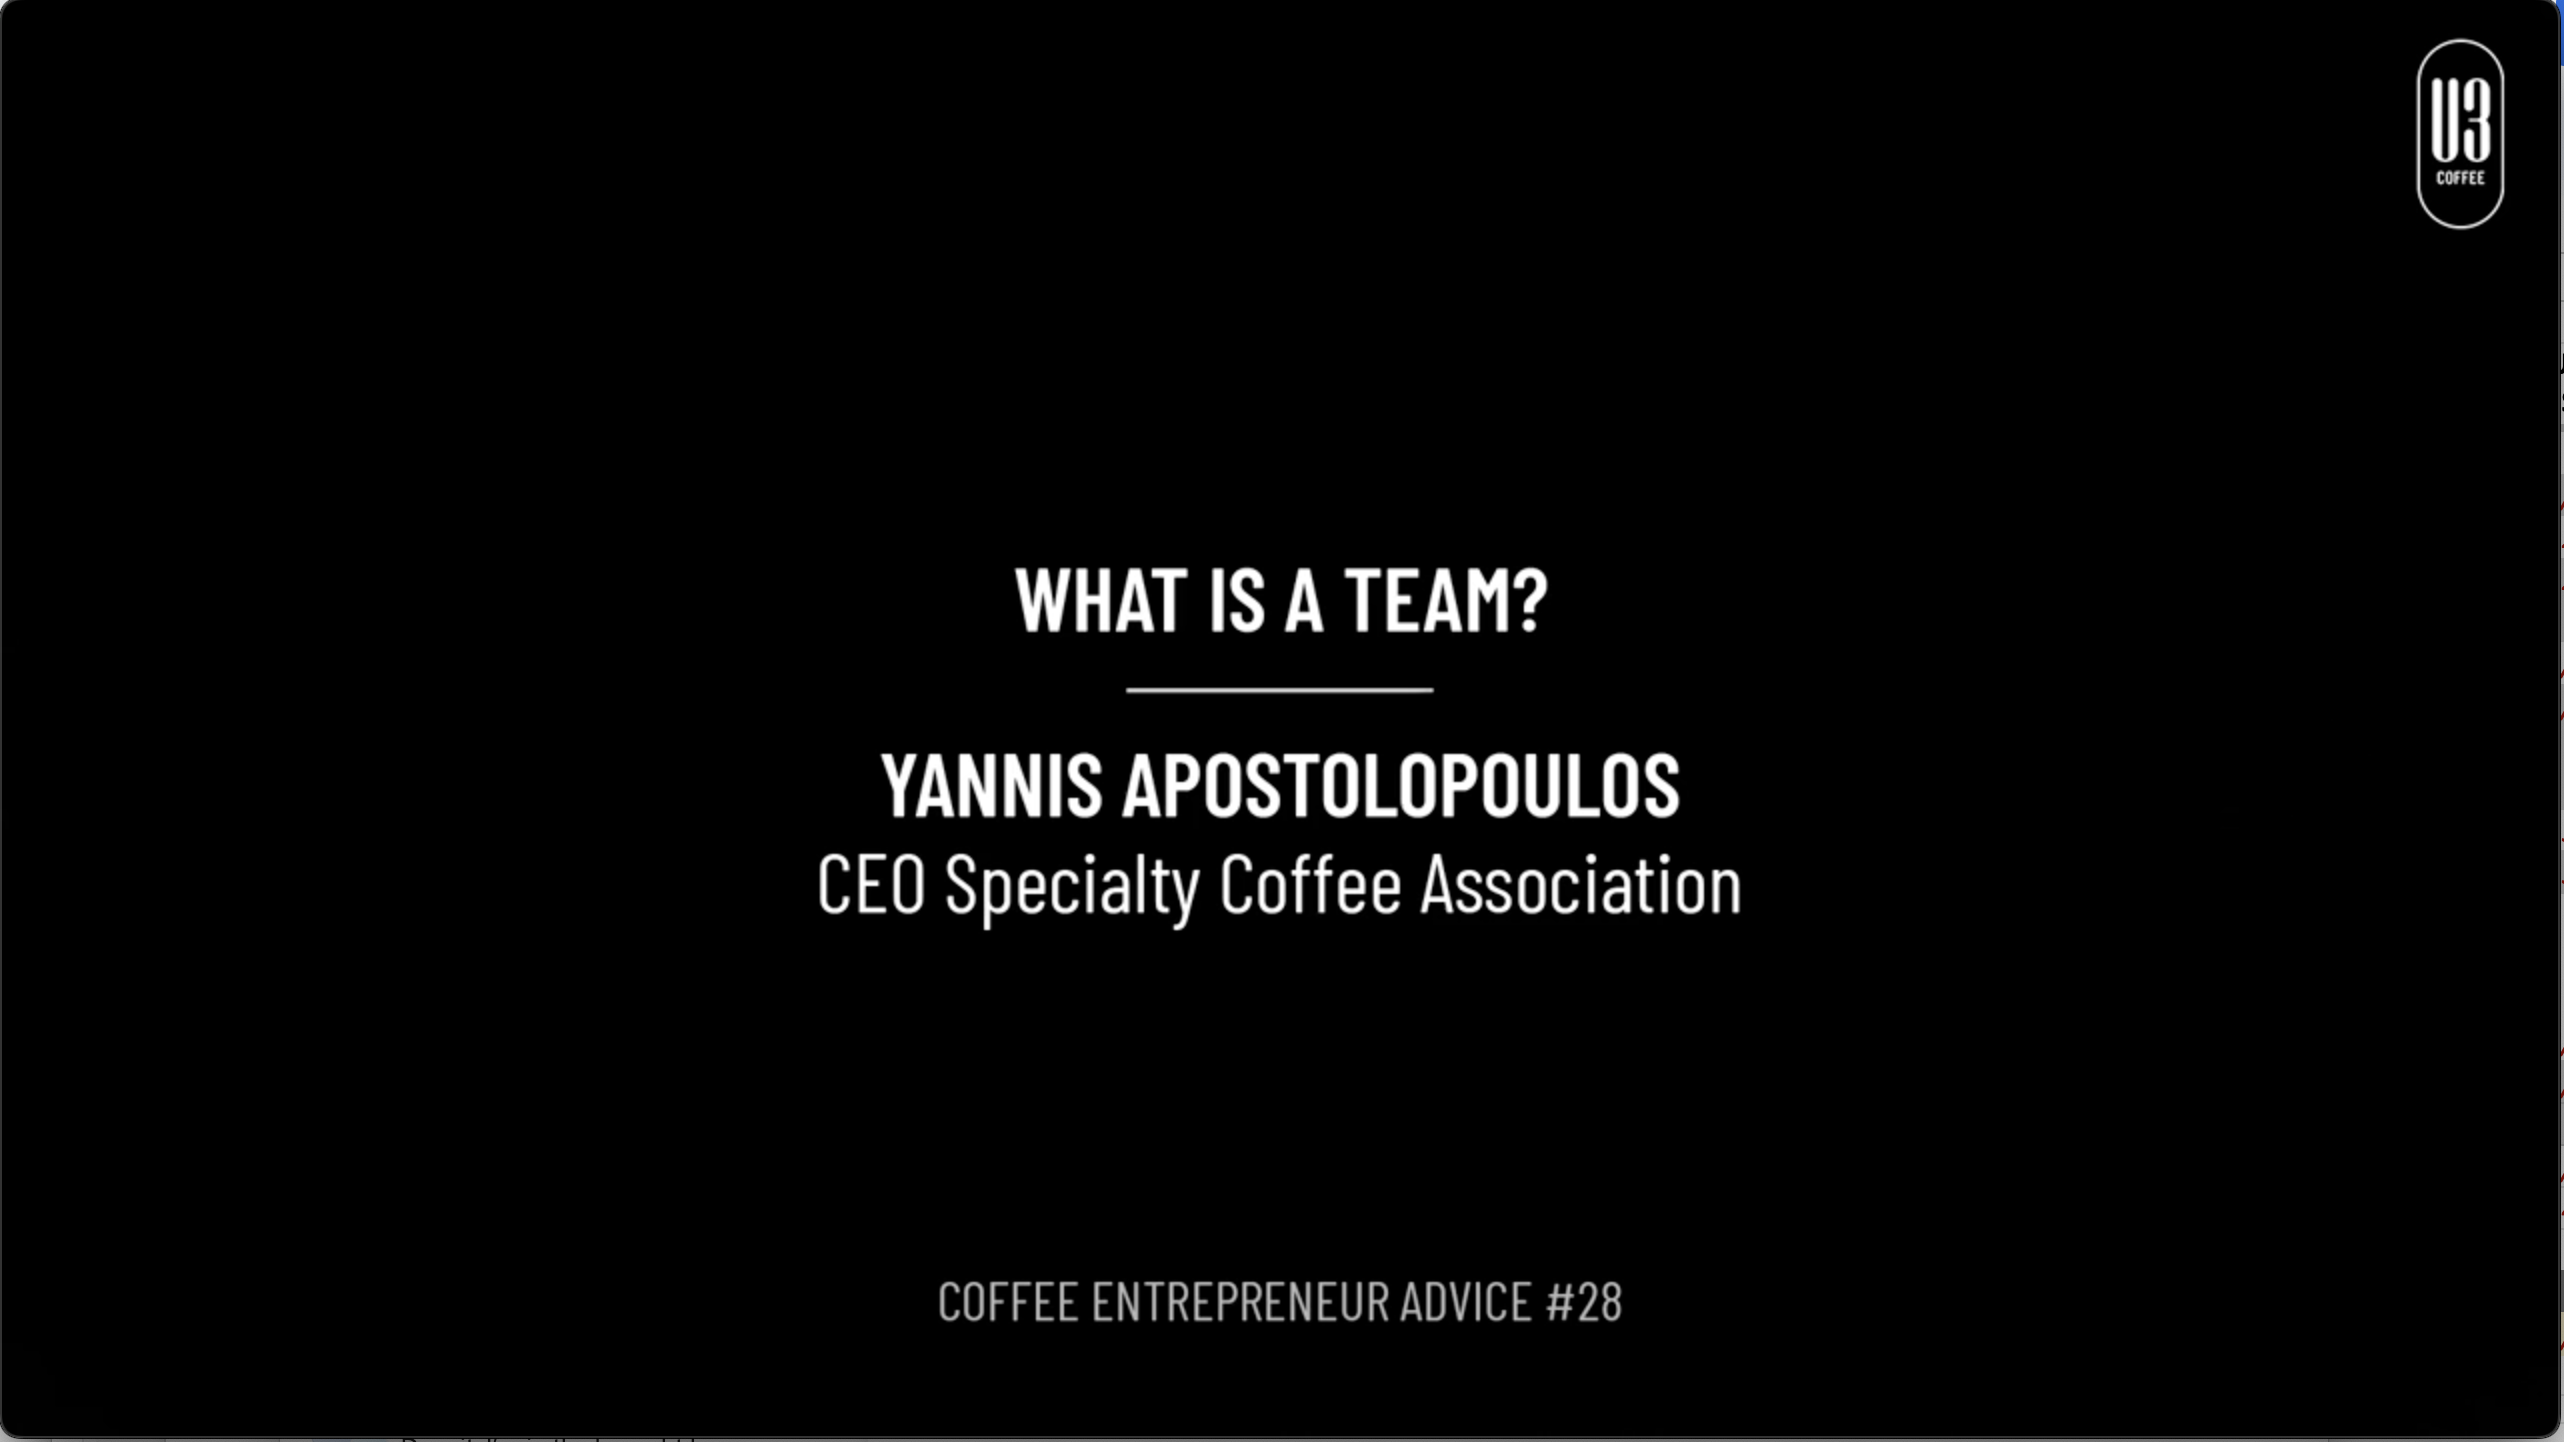 Yannis Apostolopoulos, CEO of the Specialty Coffee Association gives his advice on creating a team.